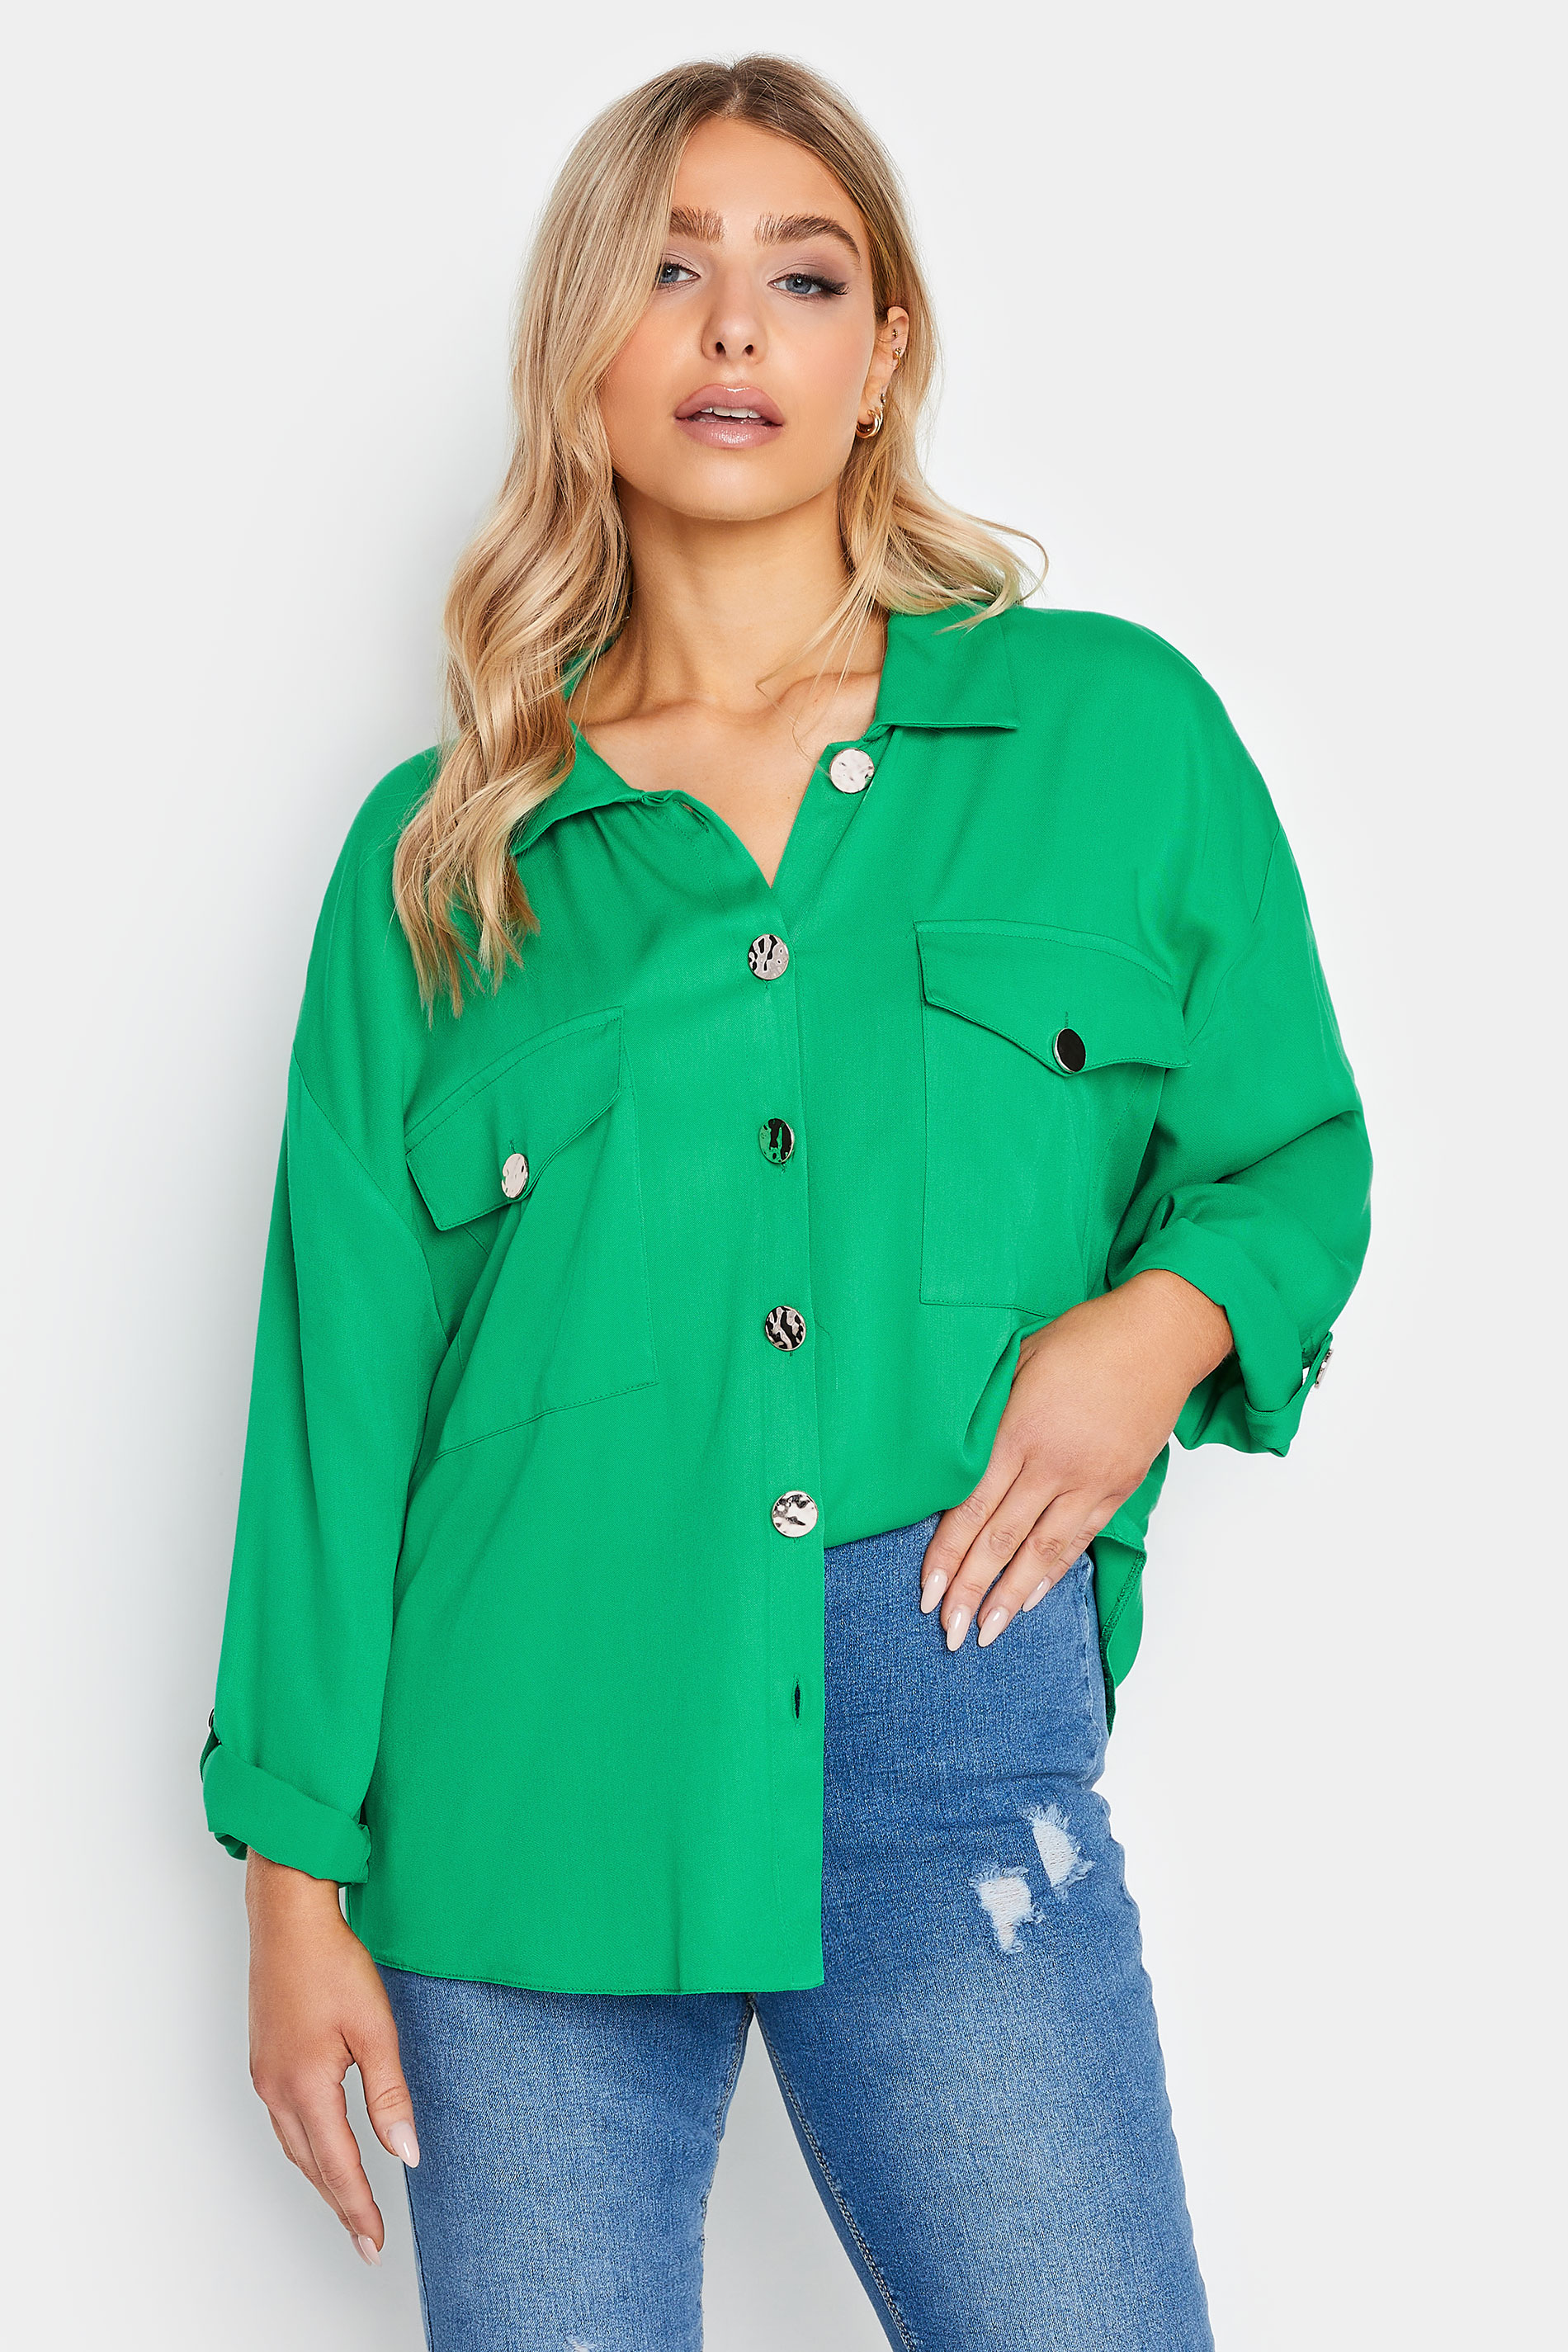 M&Co Forest Green Button Tunic Shirt | M&Co  1